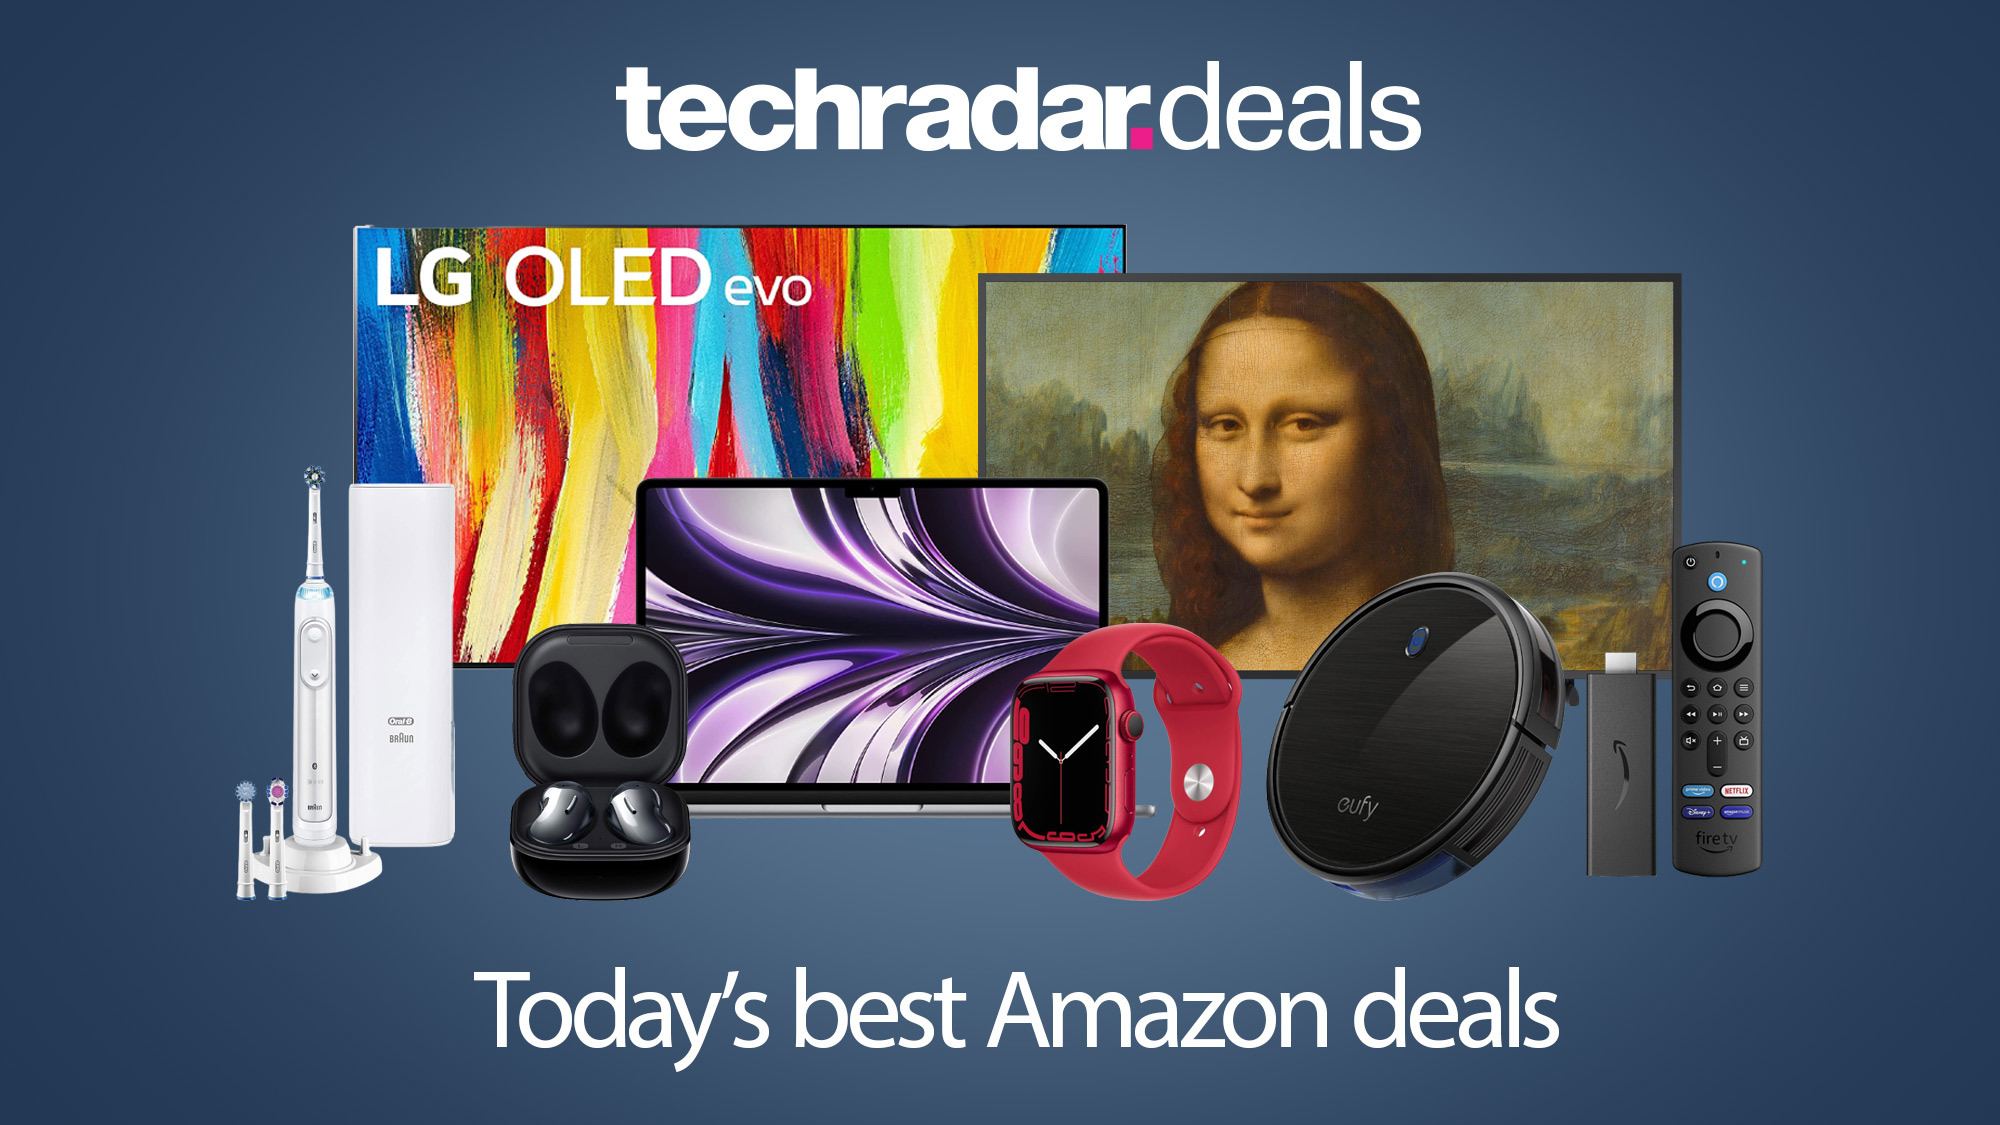 Various products on offer in the latest Amazon sale including TVs, laptops, headphones and more